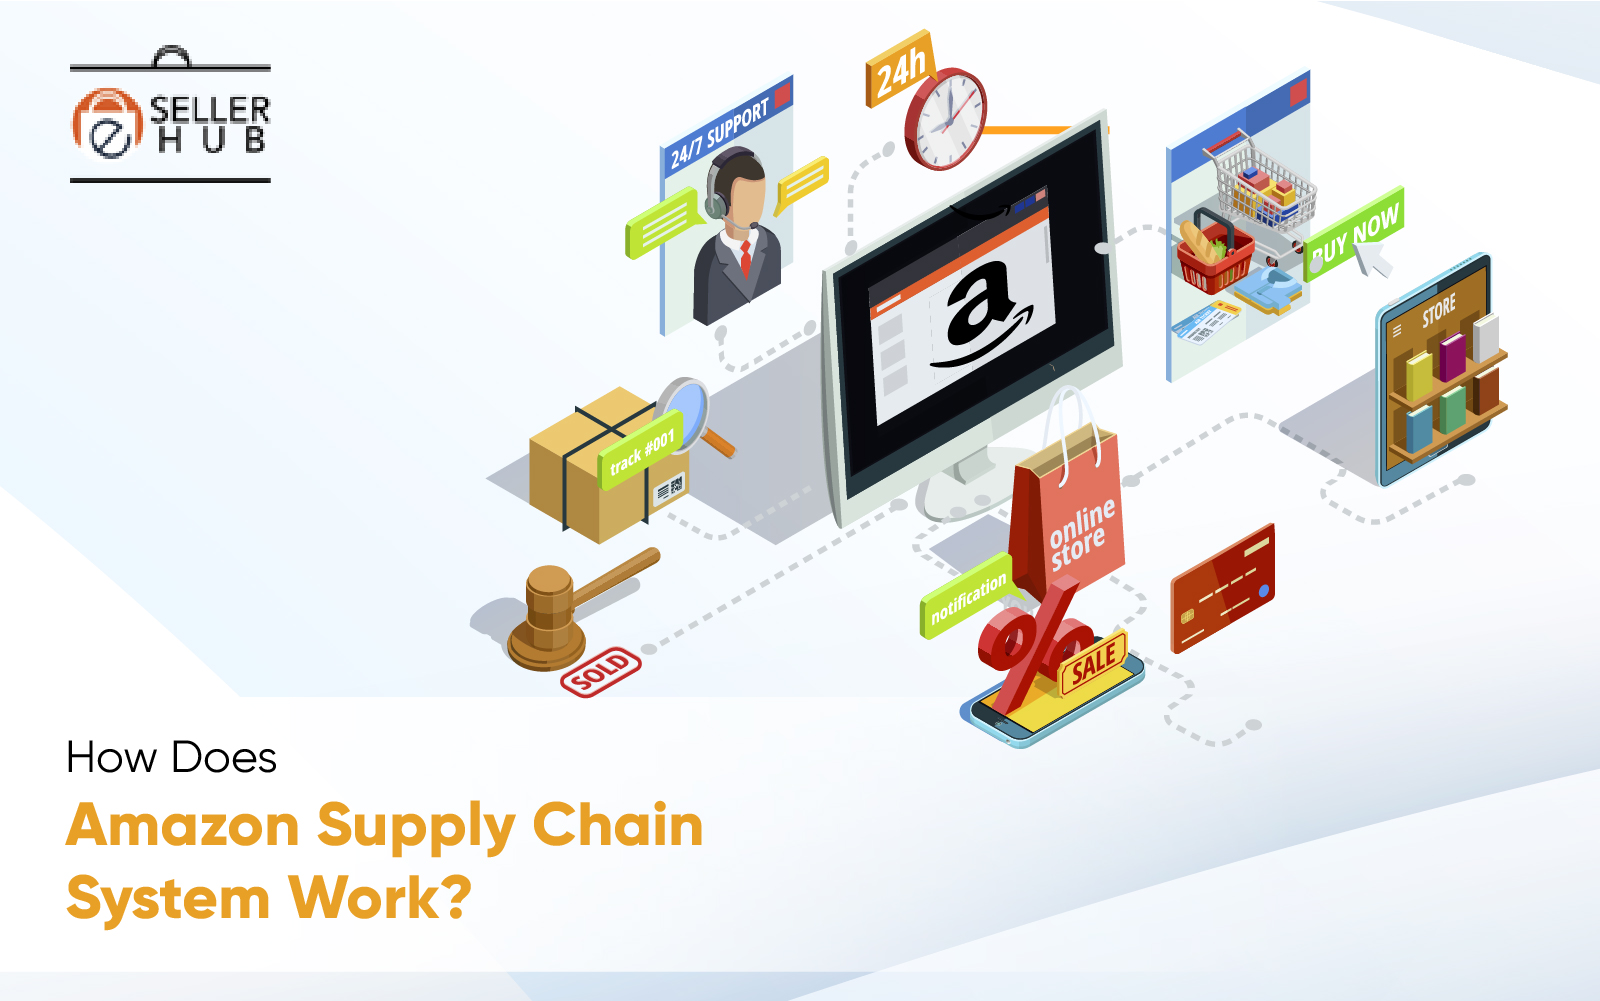 How Does Amazon Supply Chain System Work? eSellerHub